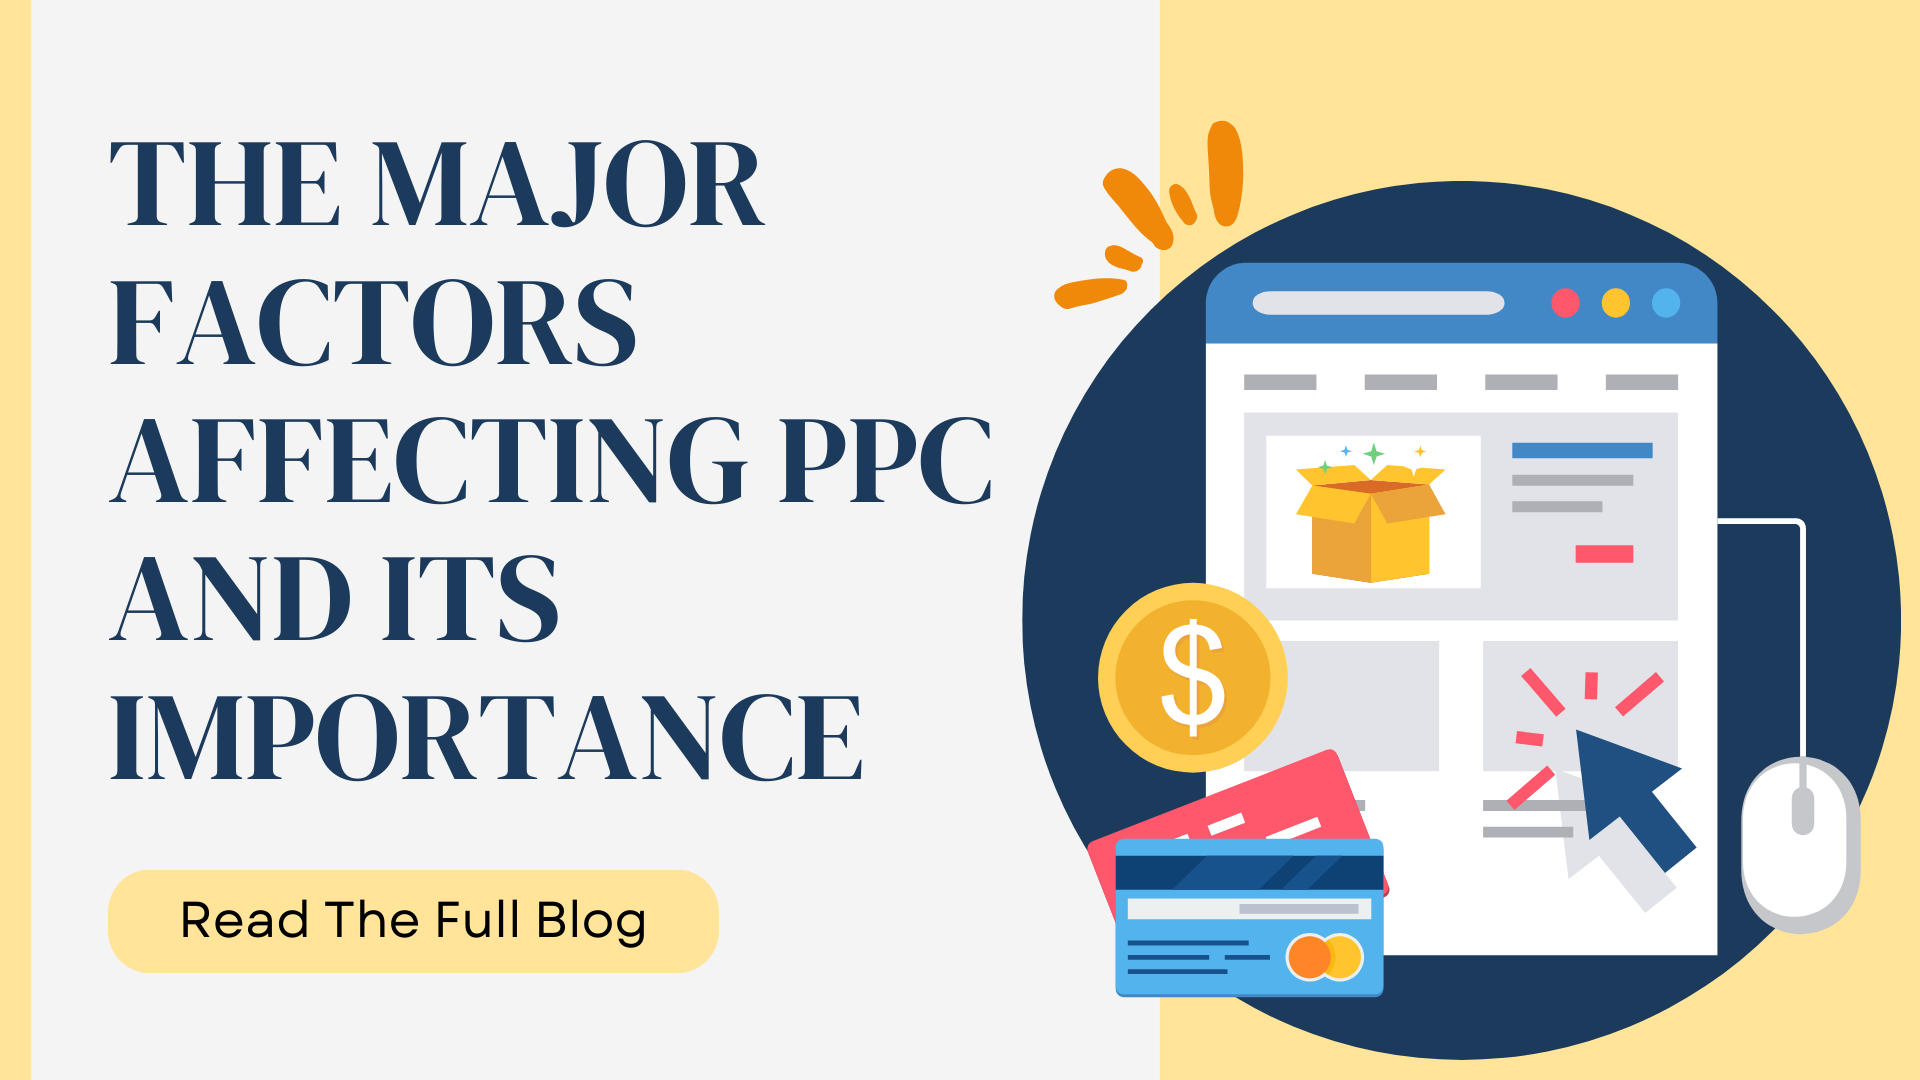 The Major Factors Affecting PPC And Its Importance